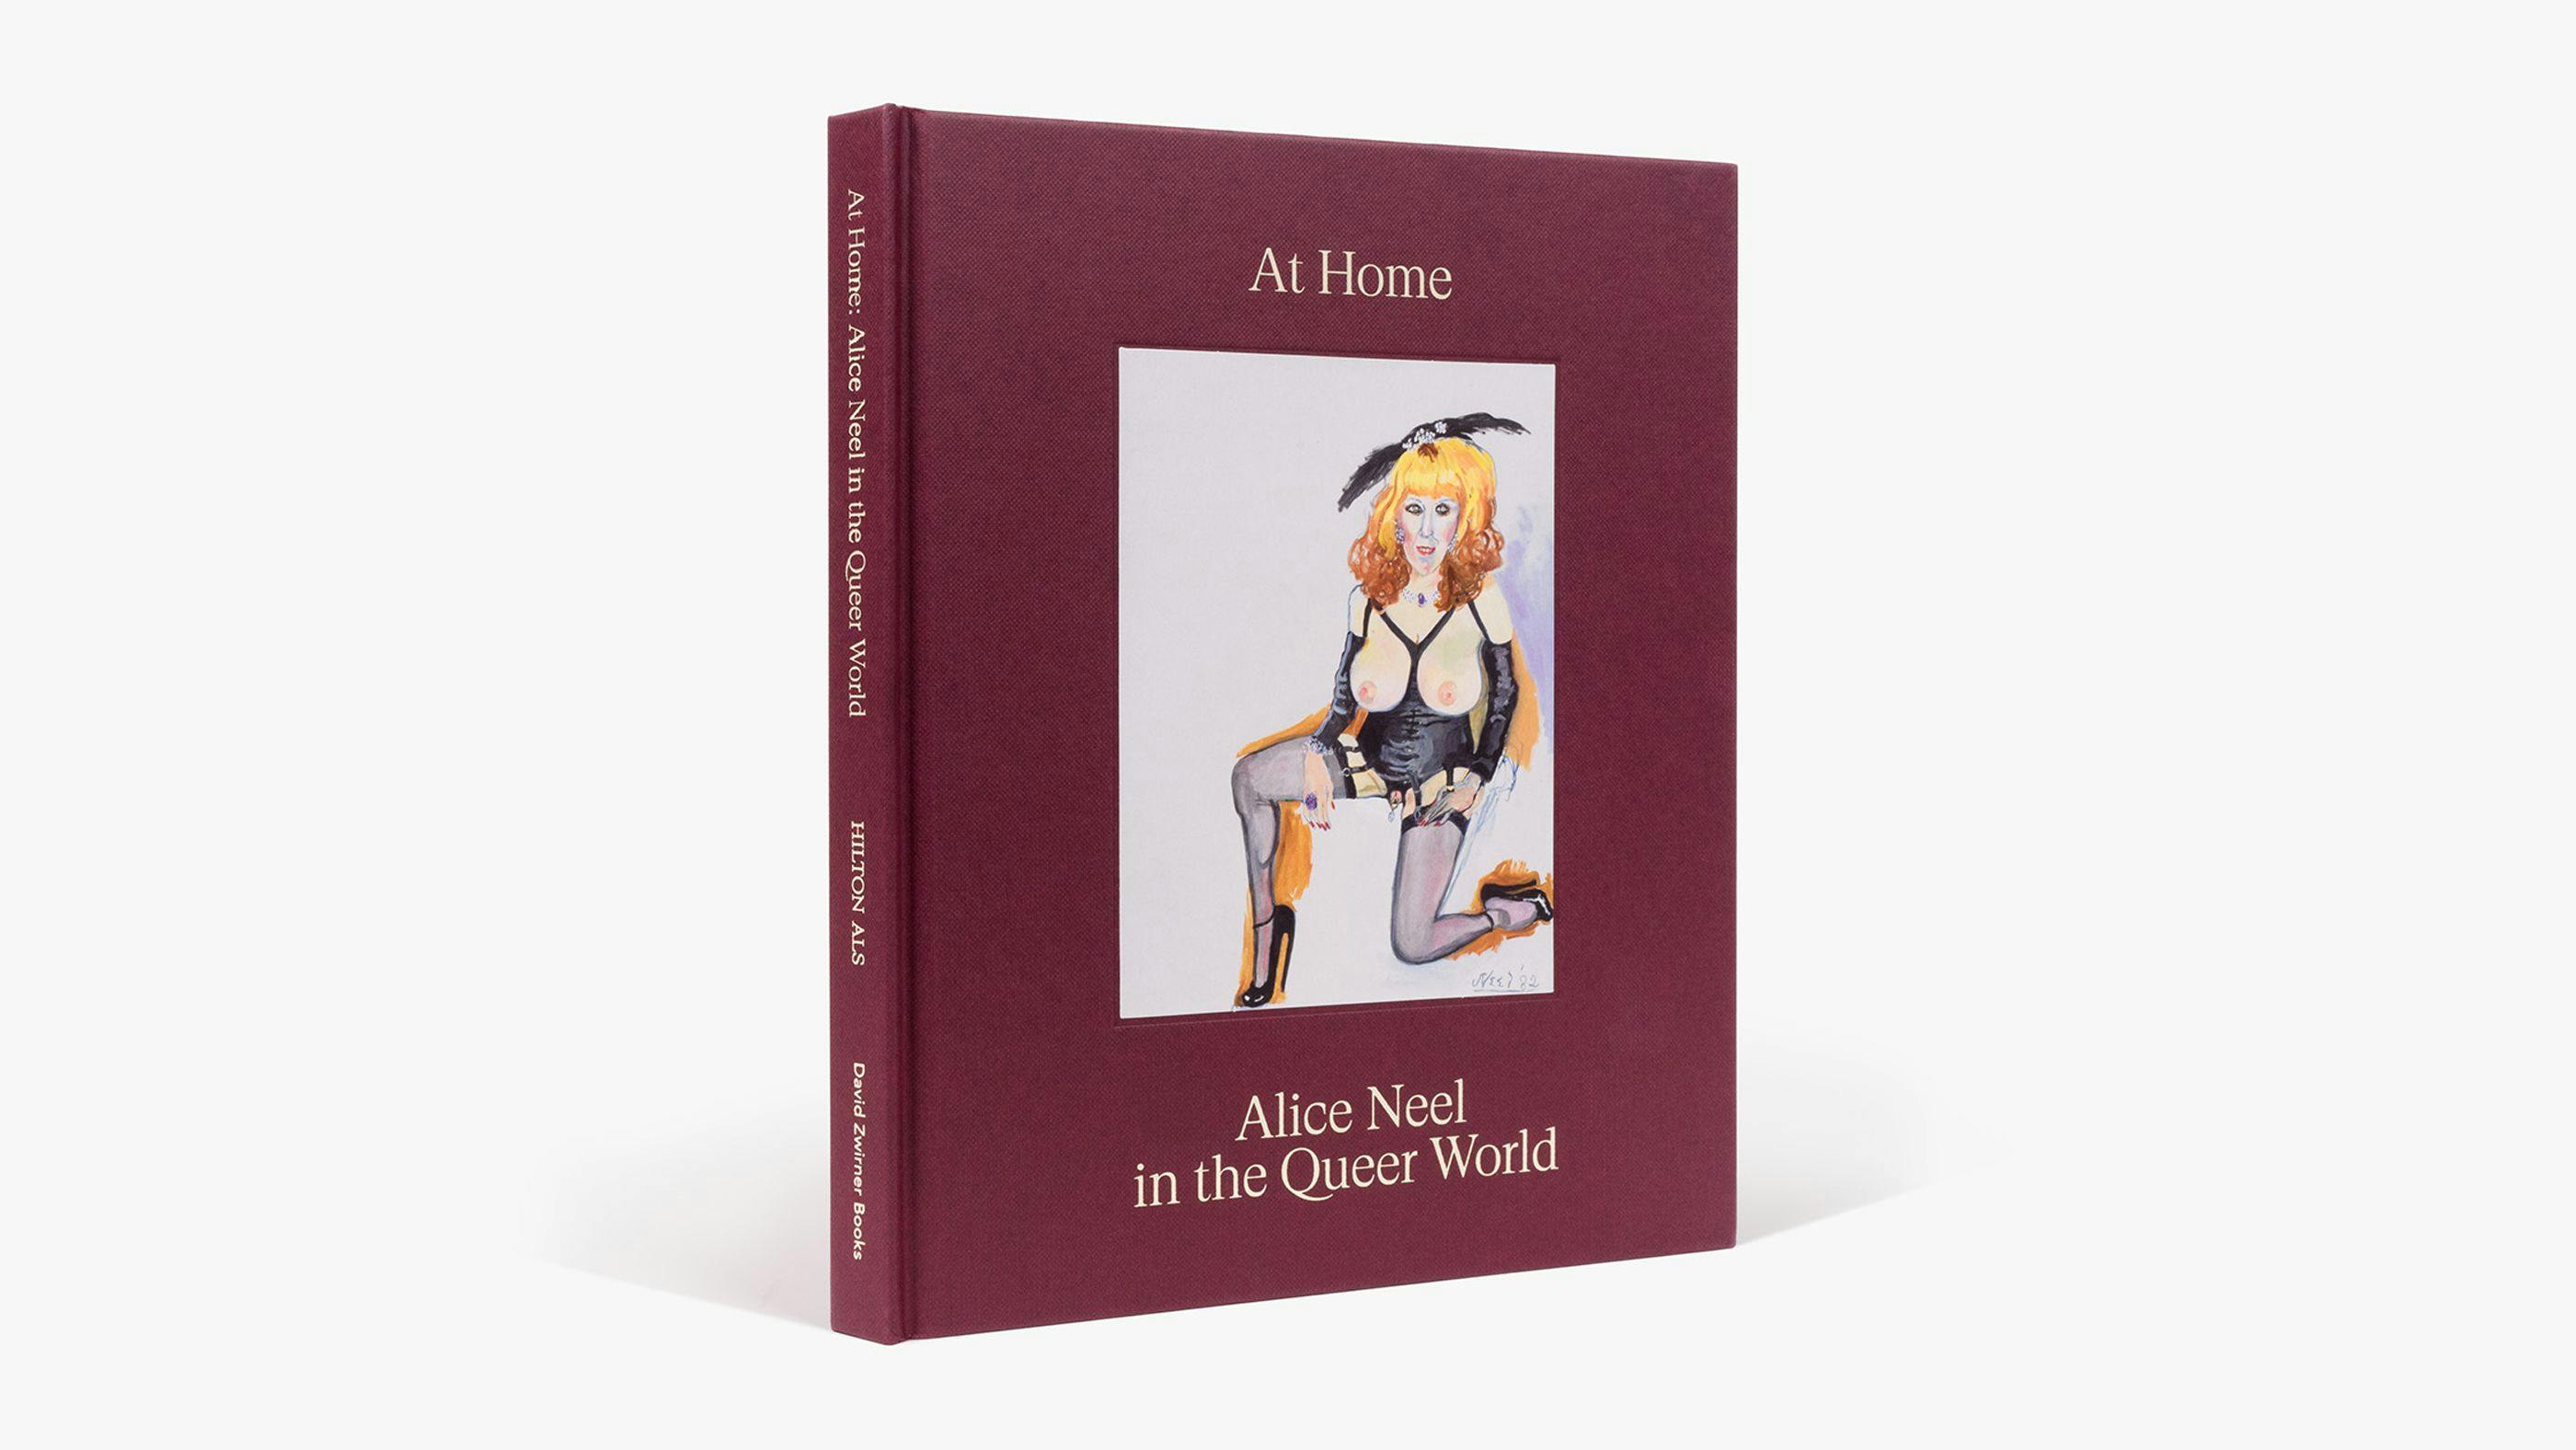 At Home: Alice Neel in the Queer World